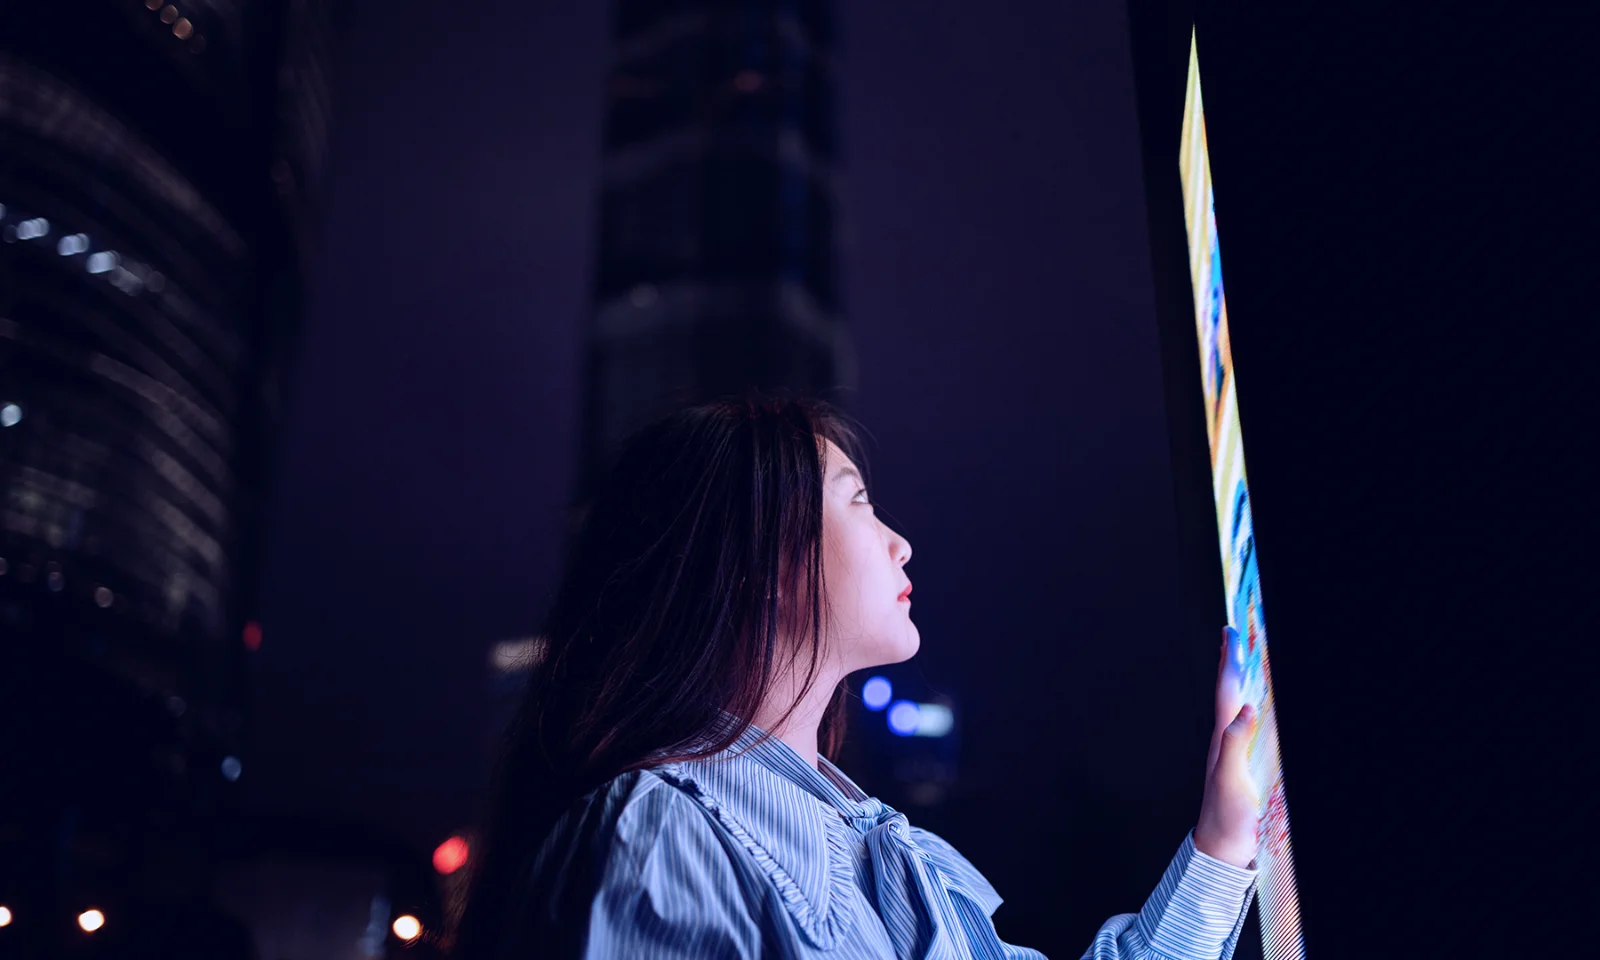 This key visual represents an overview of various industries through the imagery of a woman engaging with a large, illuminated digital screen at night. The cityscape in the background, with its towering buildings and illuminated windows, highlights the urban and industrial context. The image encapsulates the intersection of technology and modern industry, emphasizing innovation, connectivity, and the digital transformation across sectors. It serves as a visual metaphor for the broad scope and dynamic nature of various industries in the contemporary digital landscape.